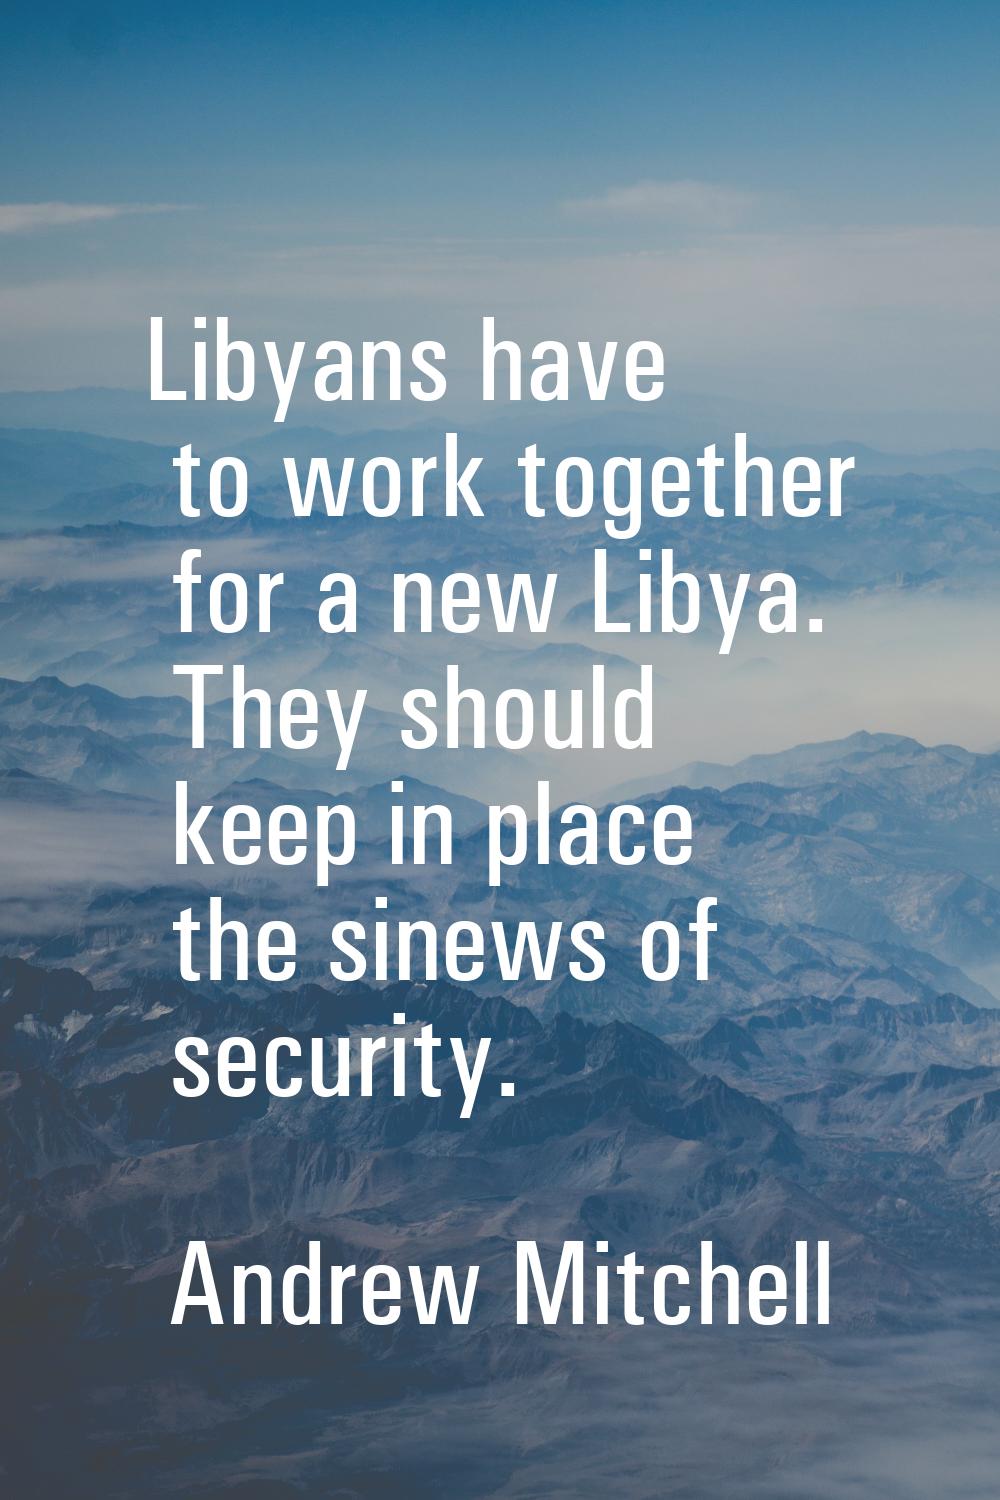 Libyans have to work together for a new Libya. They should keep in place the sinews of security.